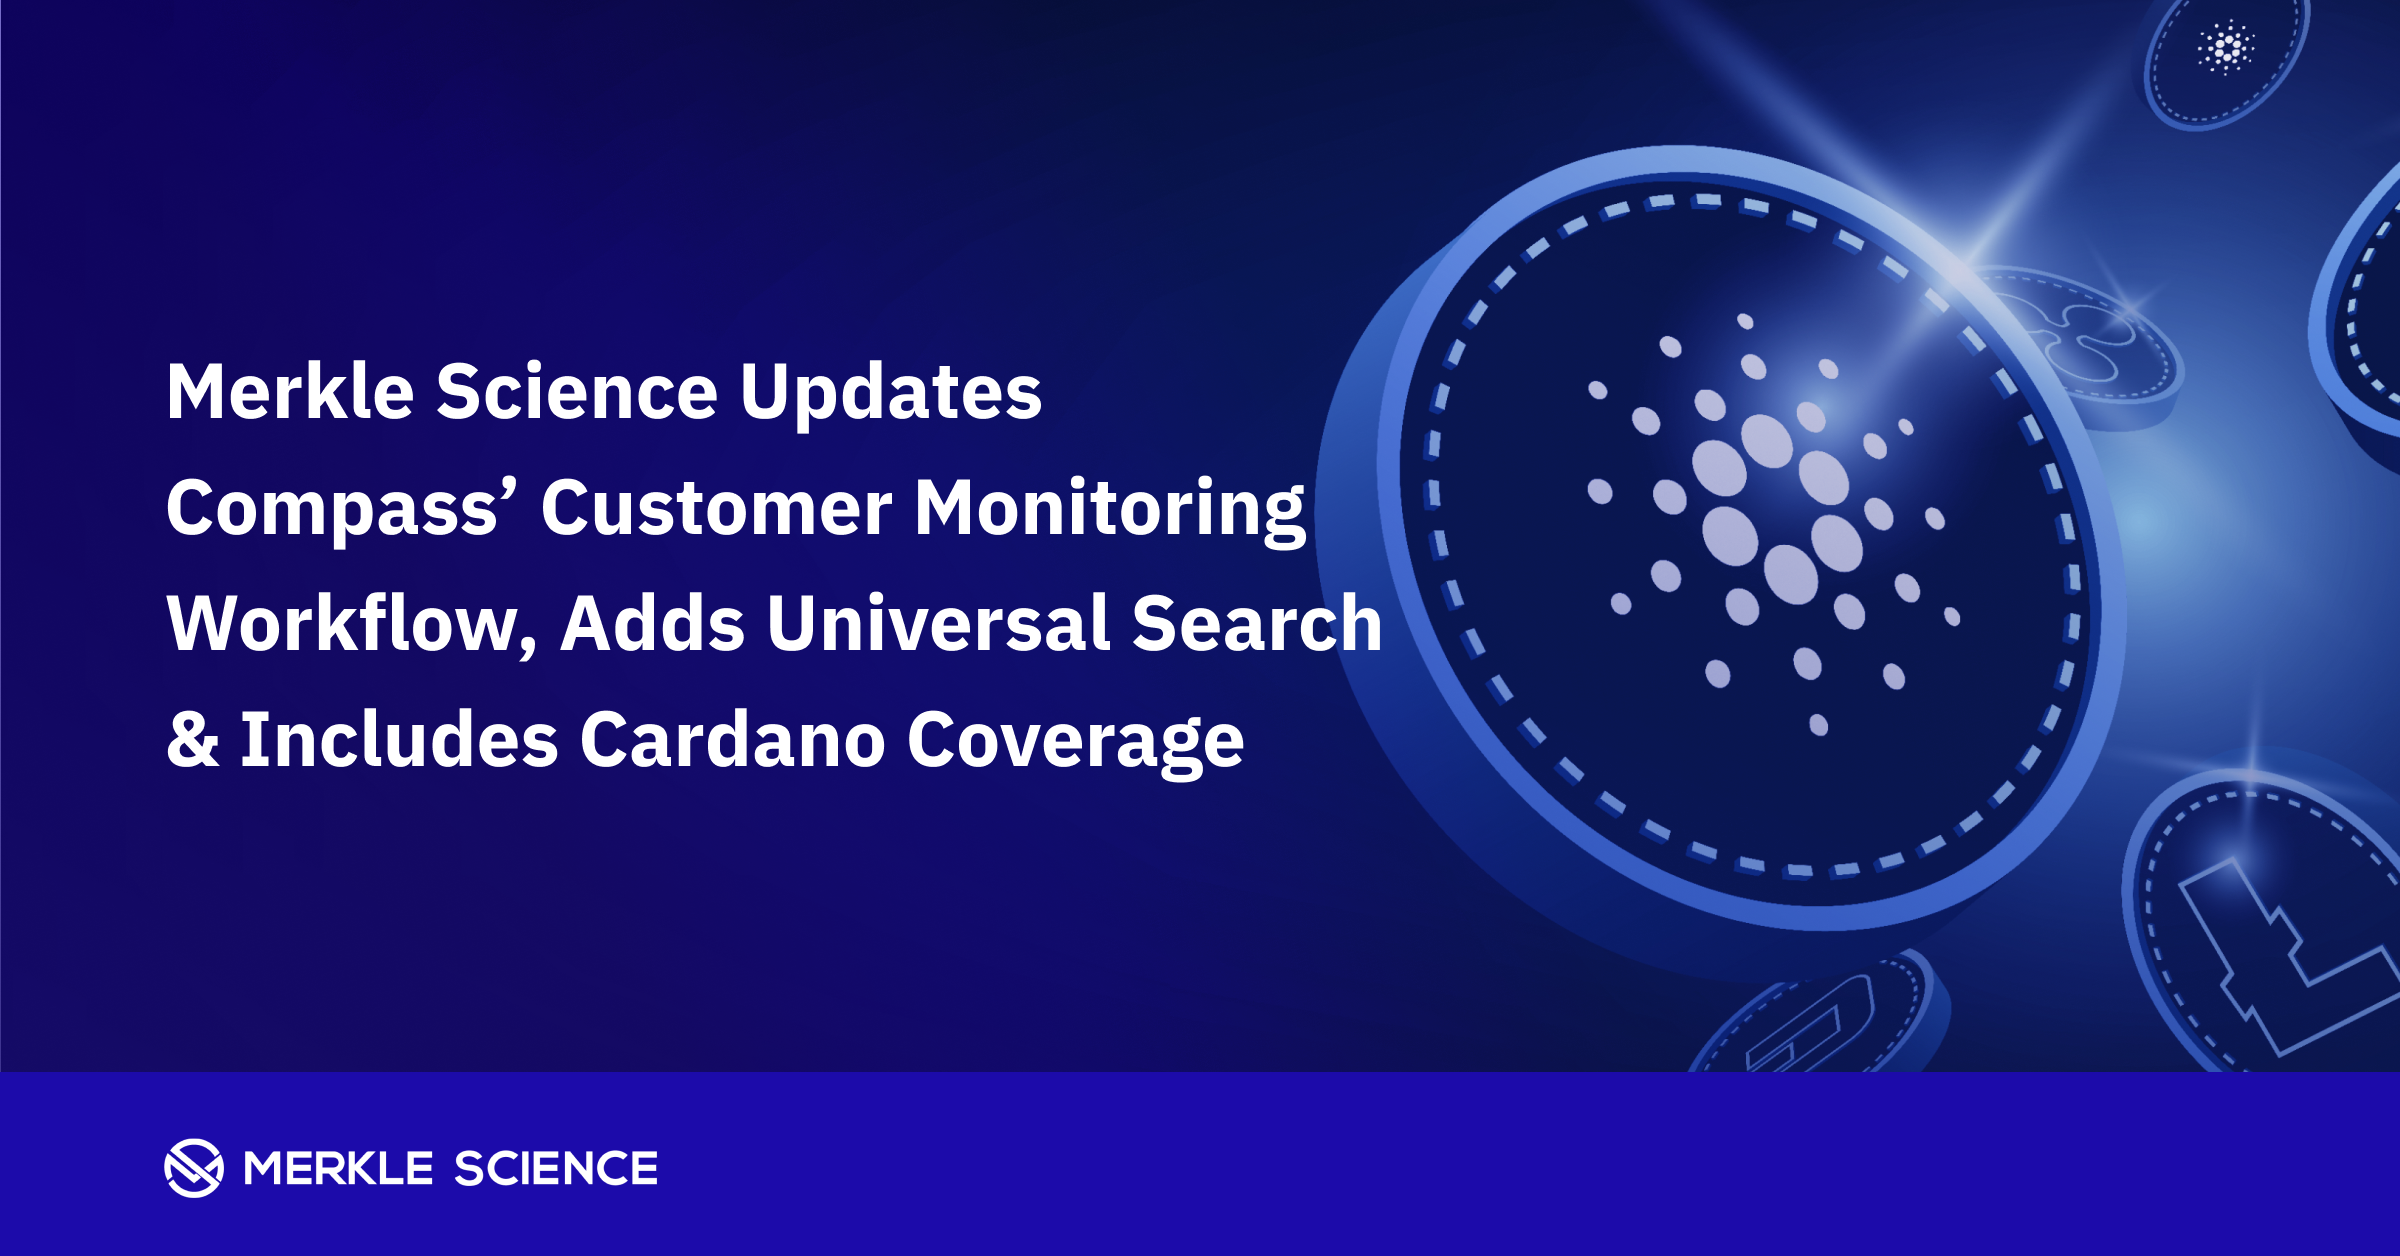 Merkle Science Updates Compass’ Customer Monitoring Workflow, Adds Universal Search & Includes Cardano Coverage I Product Updates I Merkle Science